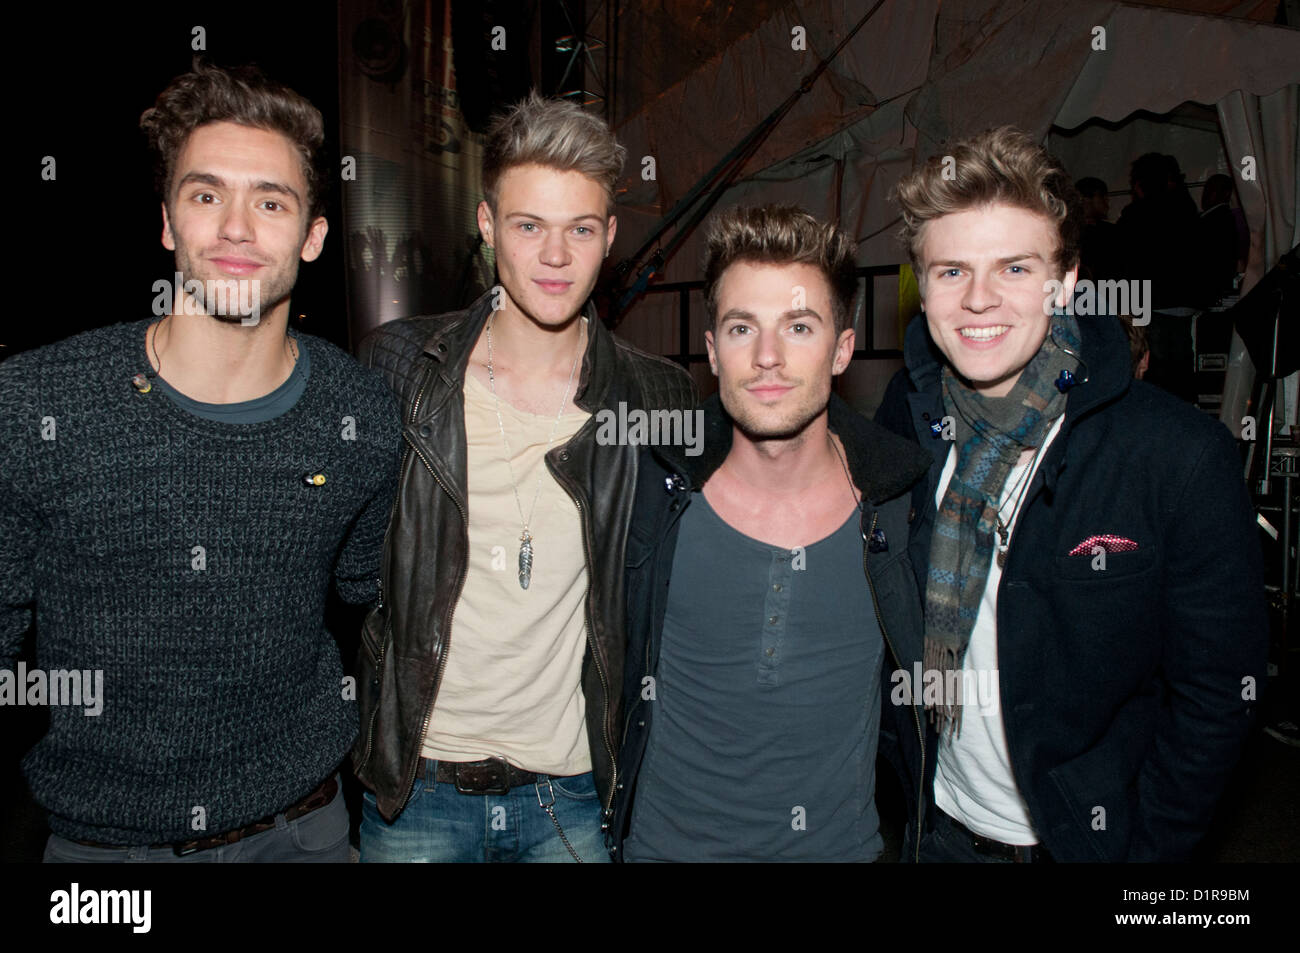 Lawson backstage at the Meadowhall Christmas lights switch on concert Stock Photo